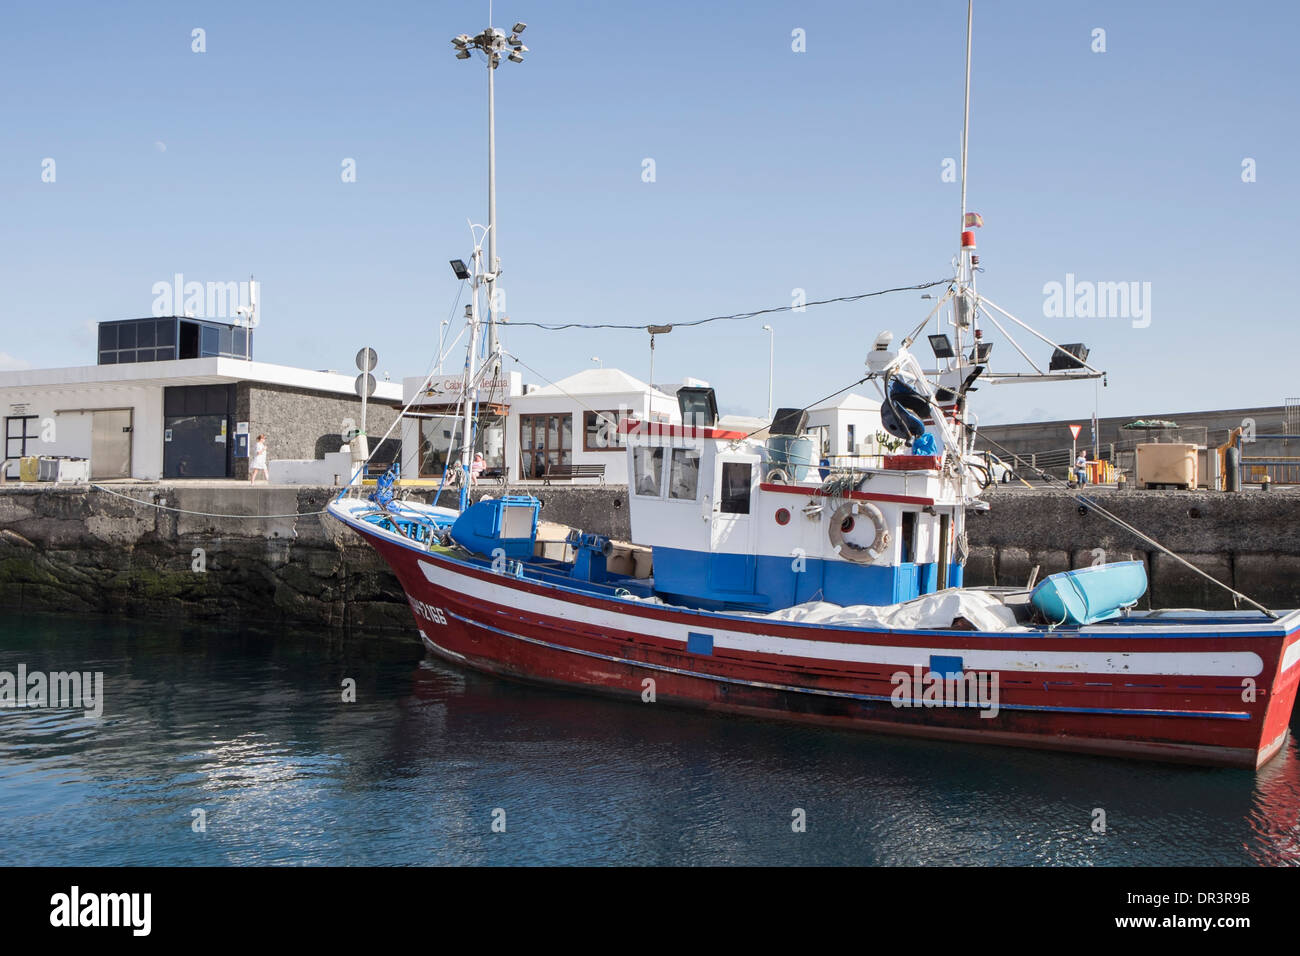 Traditional red fishing boat in the port of Puerto del Carmen, Lanzarote, Canary Islands, Spain Stock Photo